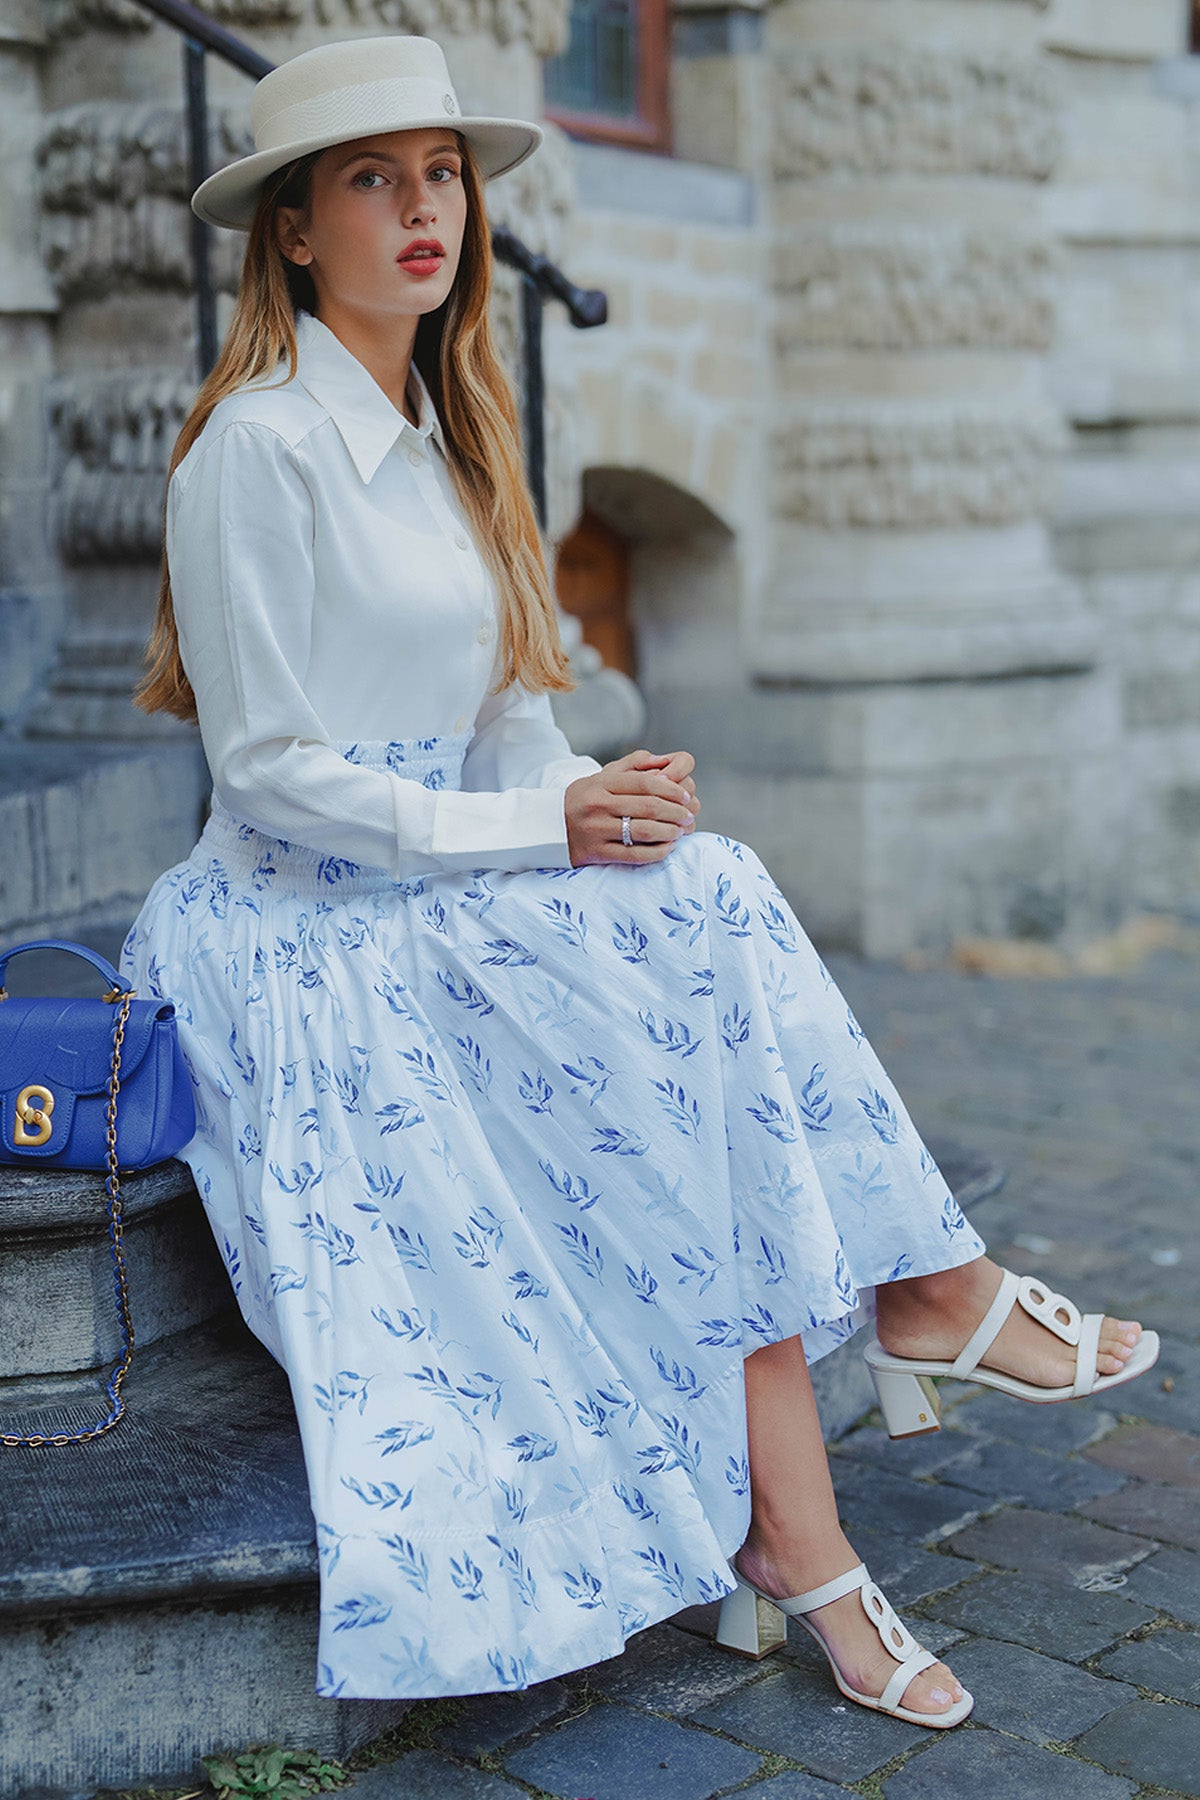 Into The Blue Smock Maxi Cotton Skirt - Blue Leaf